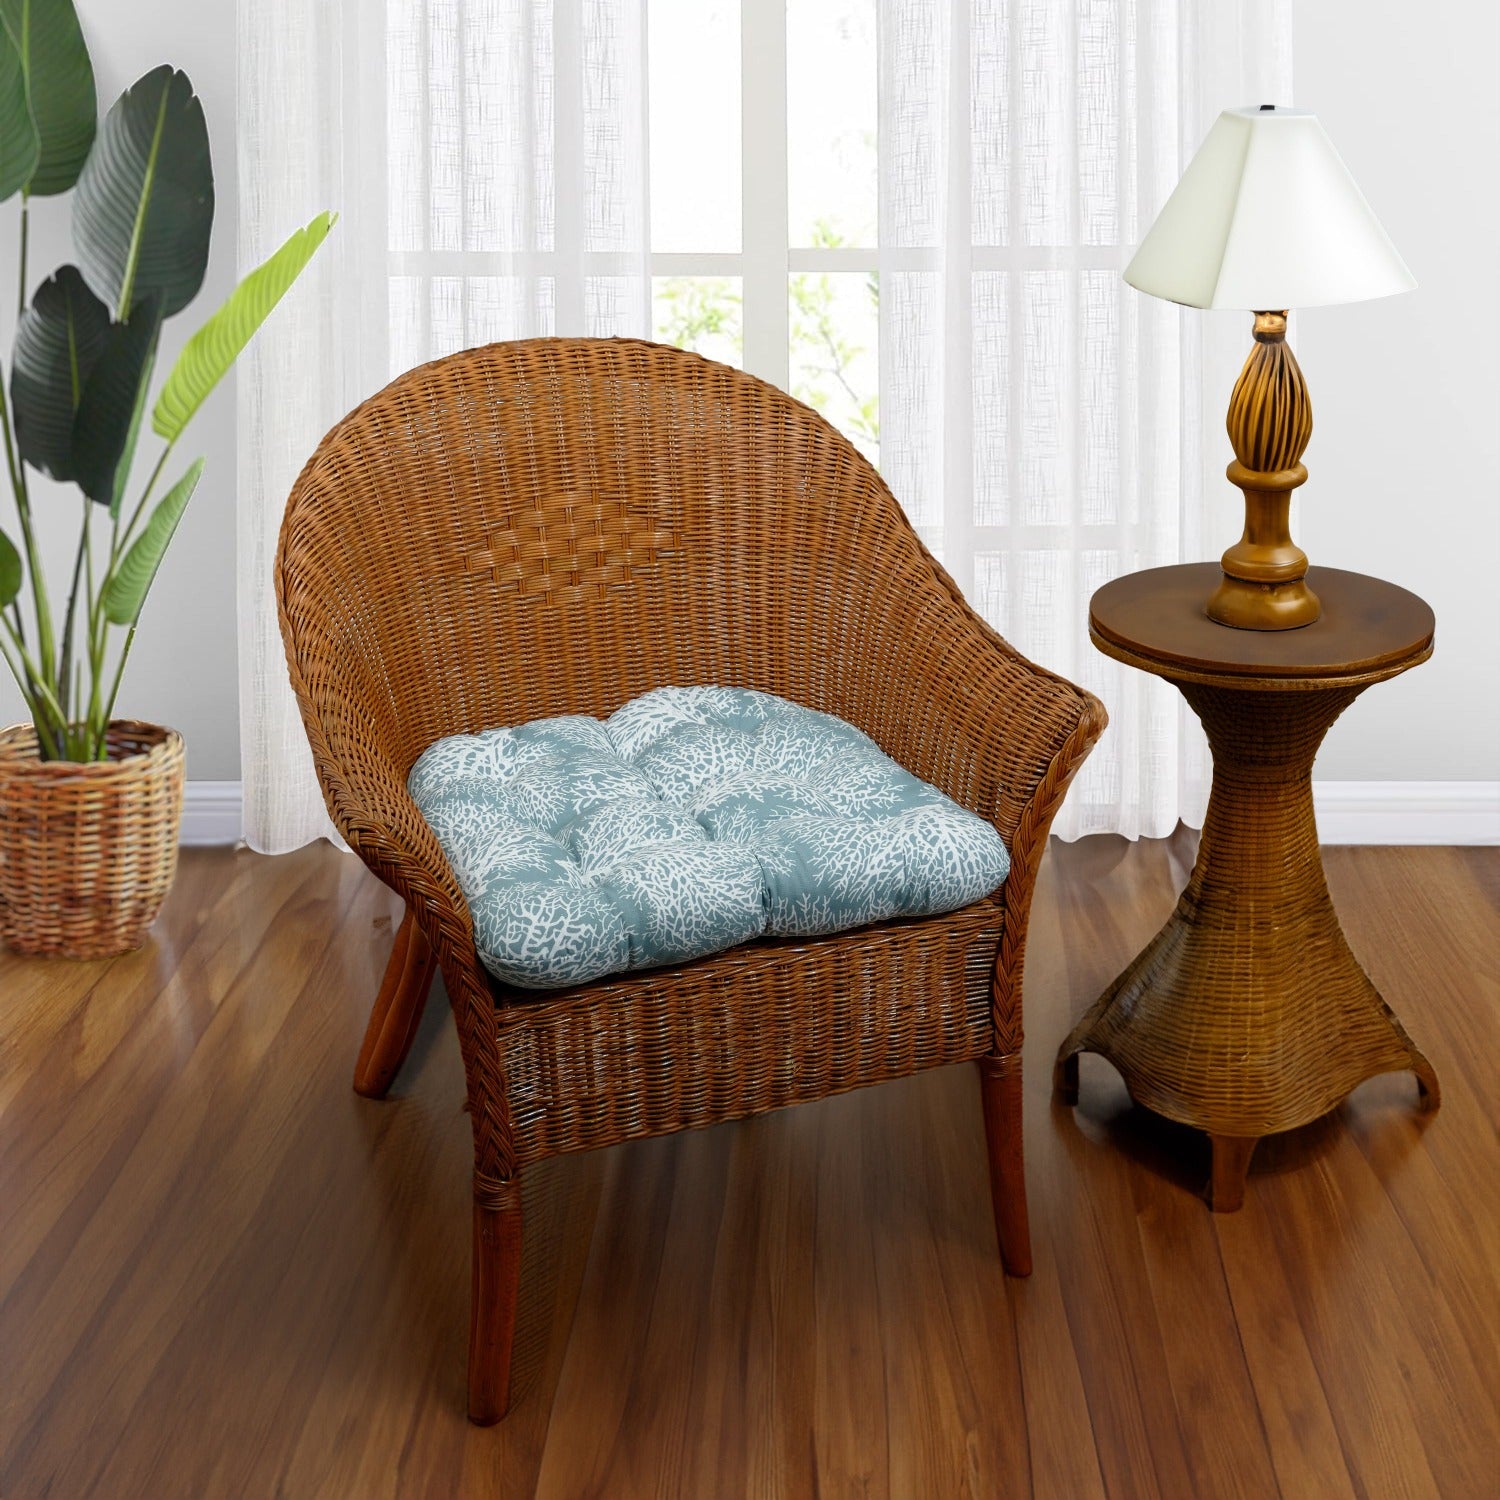 wicker chair cushion with fan coral pattern in aqua on a rattan chair in a plantation style living room